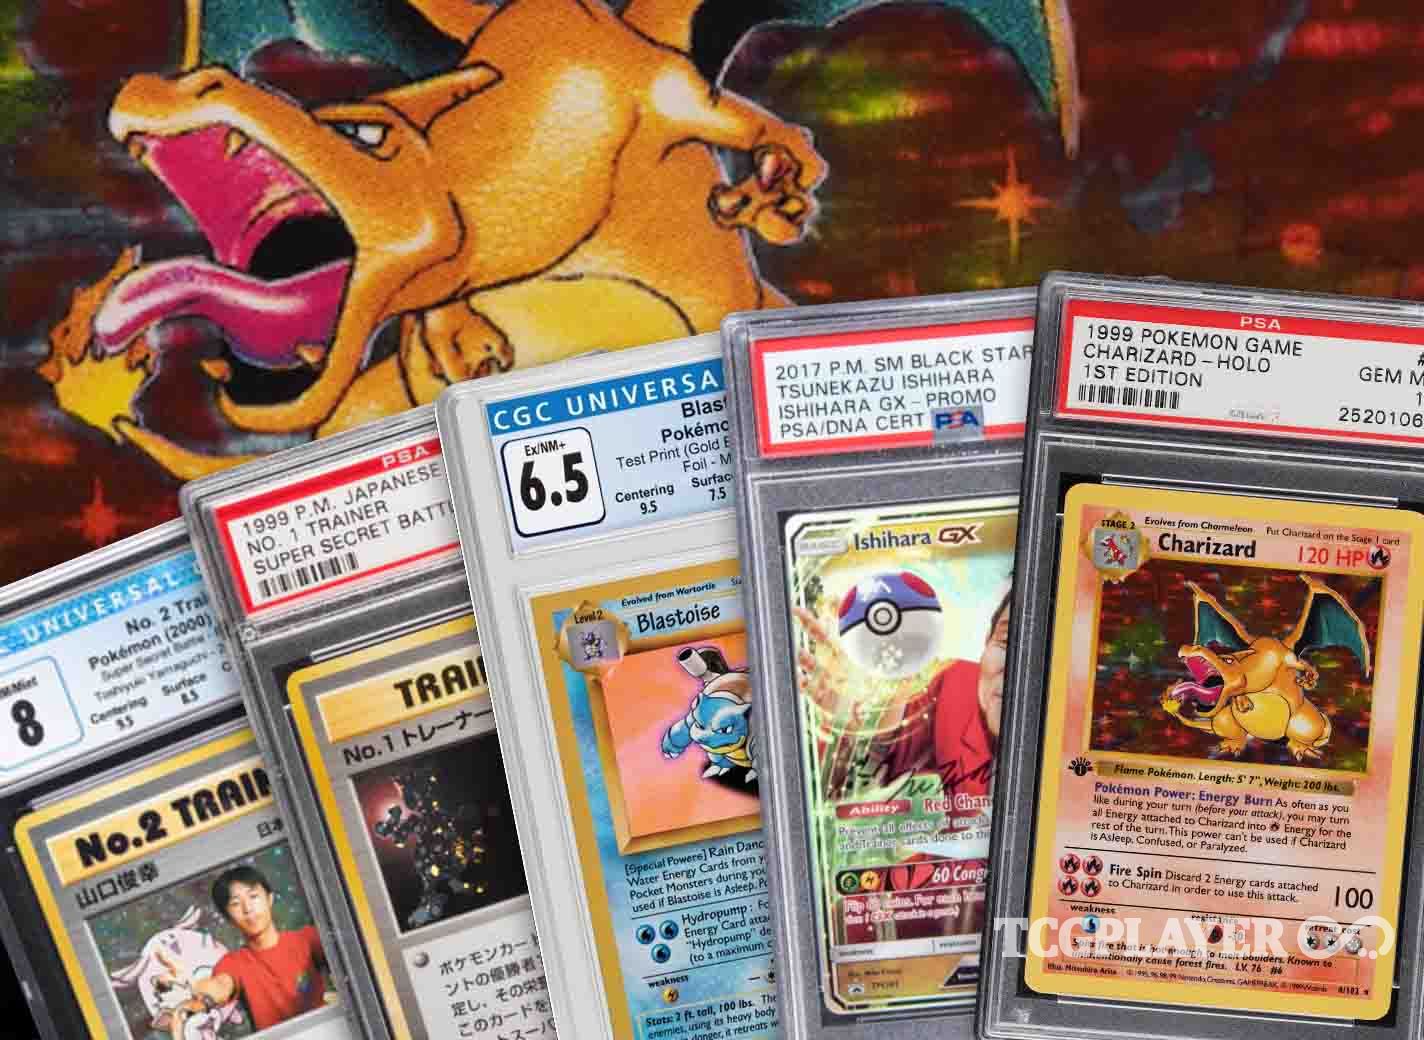 The 20 Most Expensive Pokémon Cards Ever